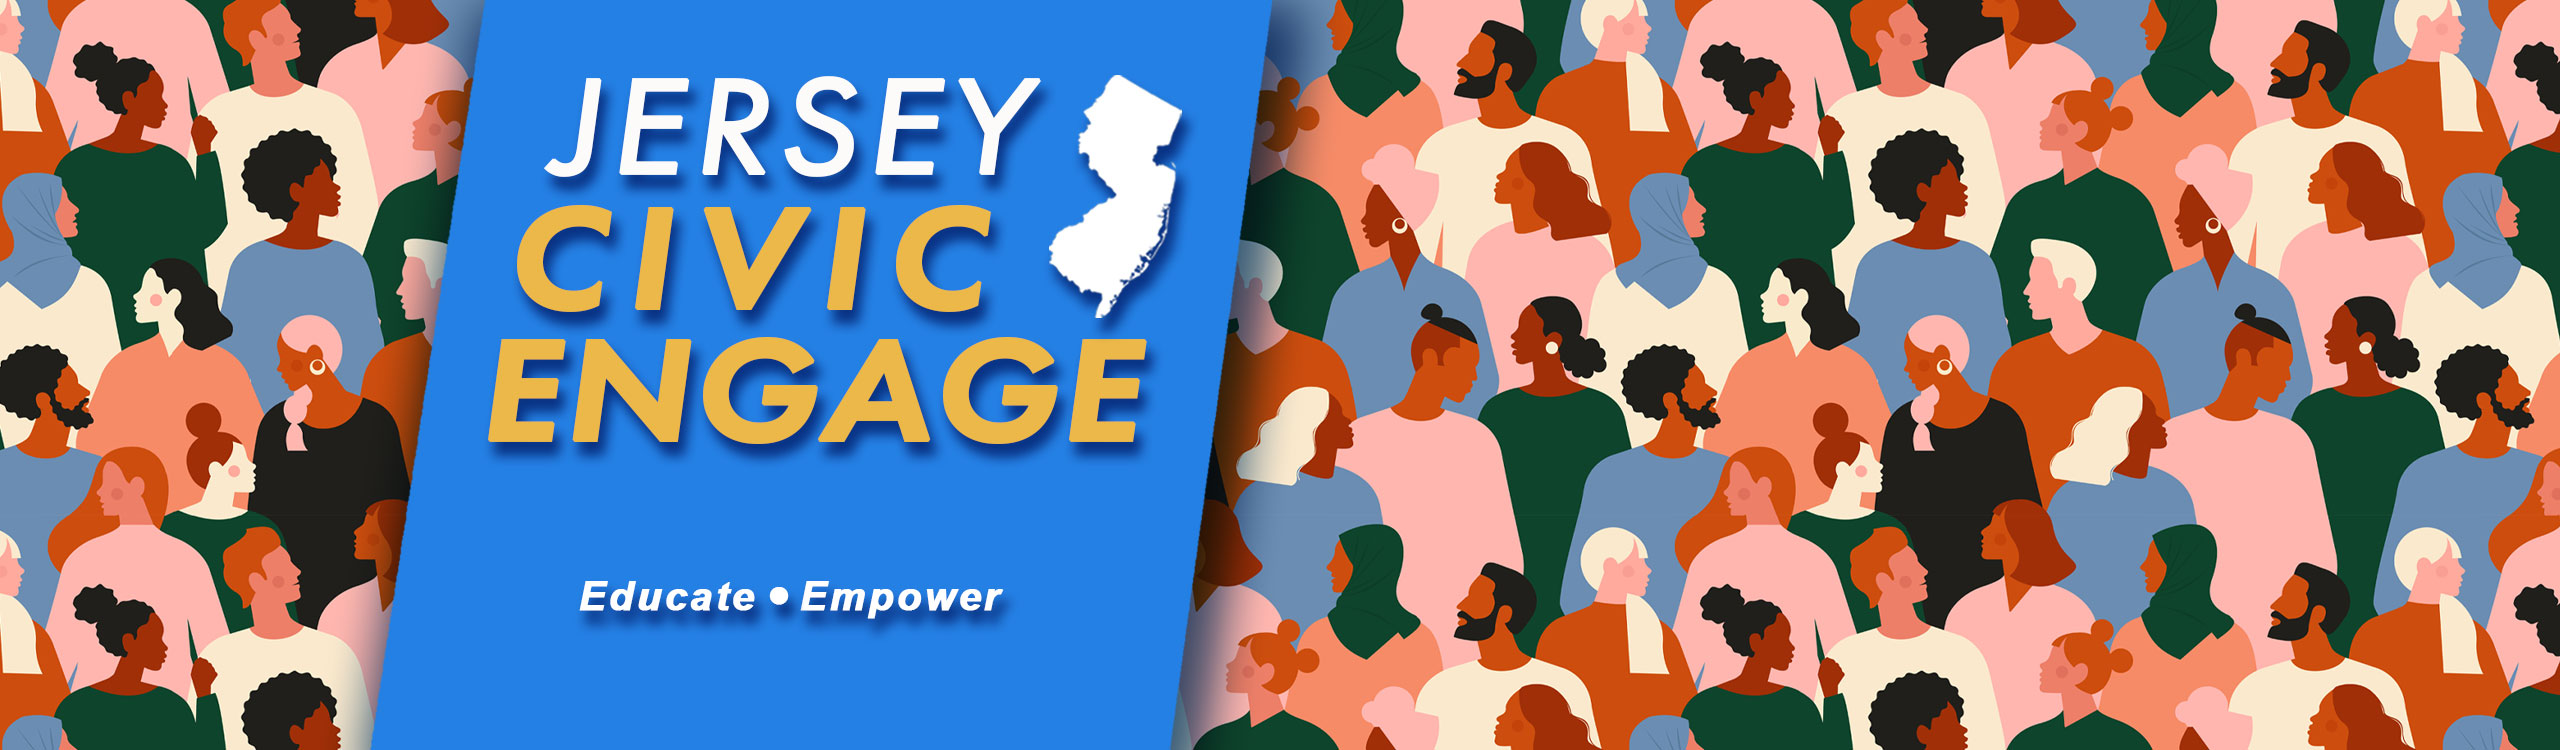 Jersey Civic Engage logo and graphic